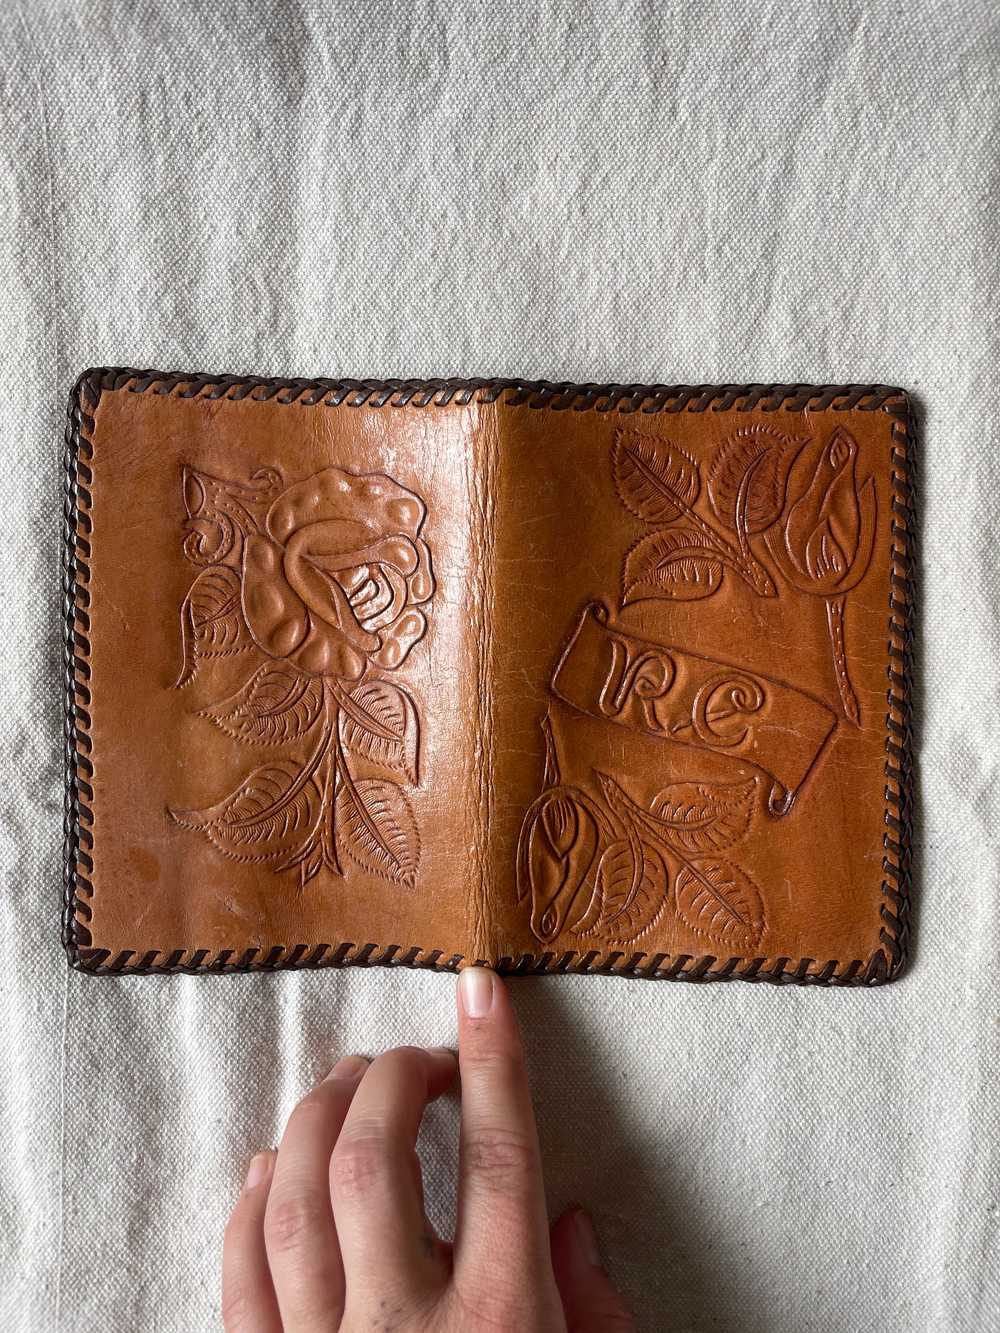 70s tooled leather wallet / 1970s leather bifold … - image 1